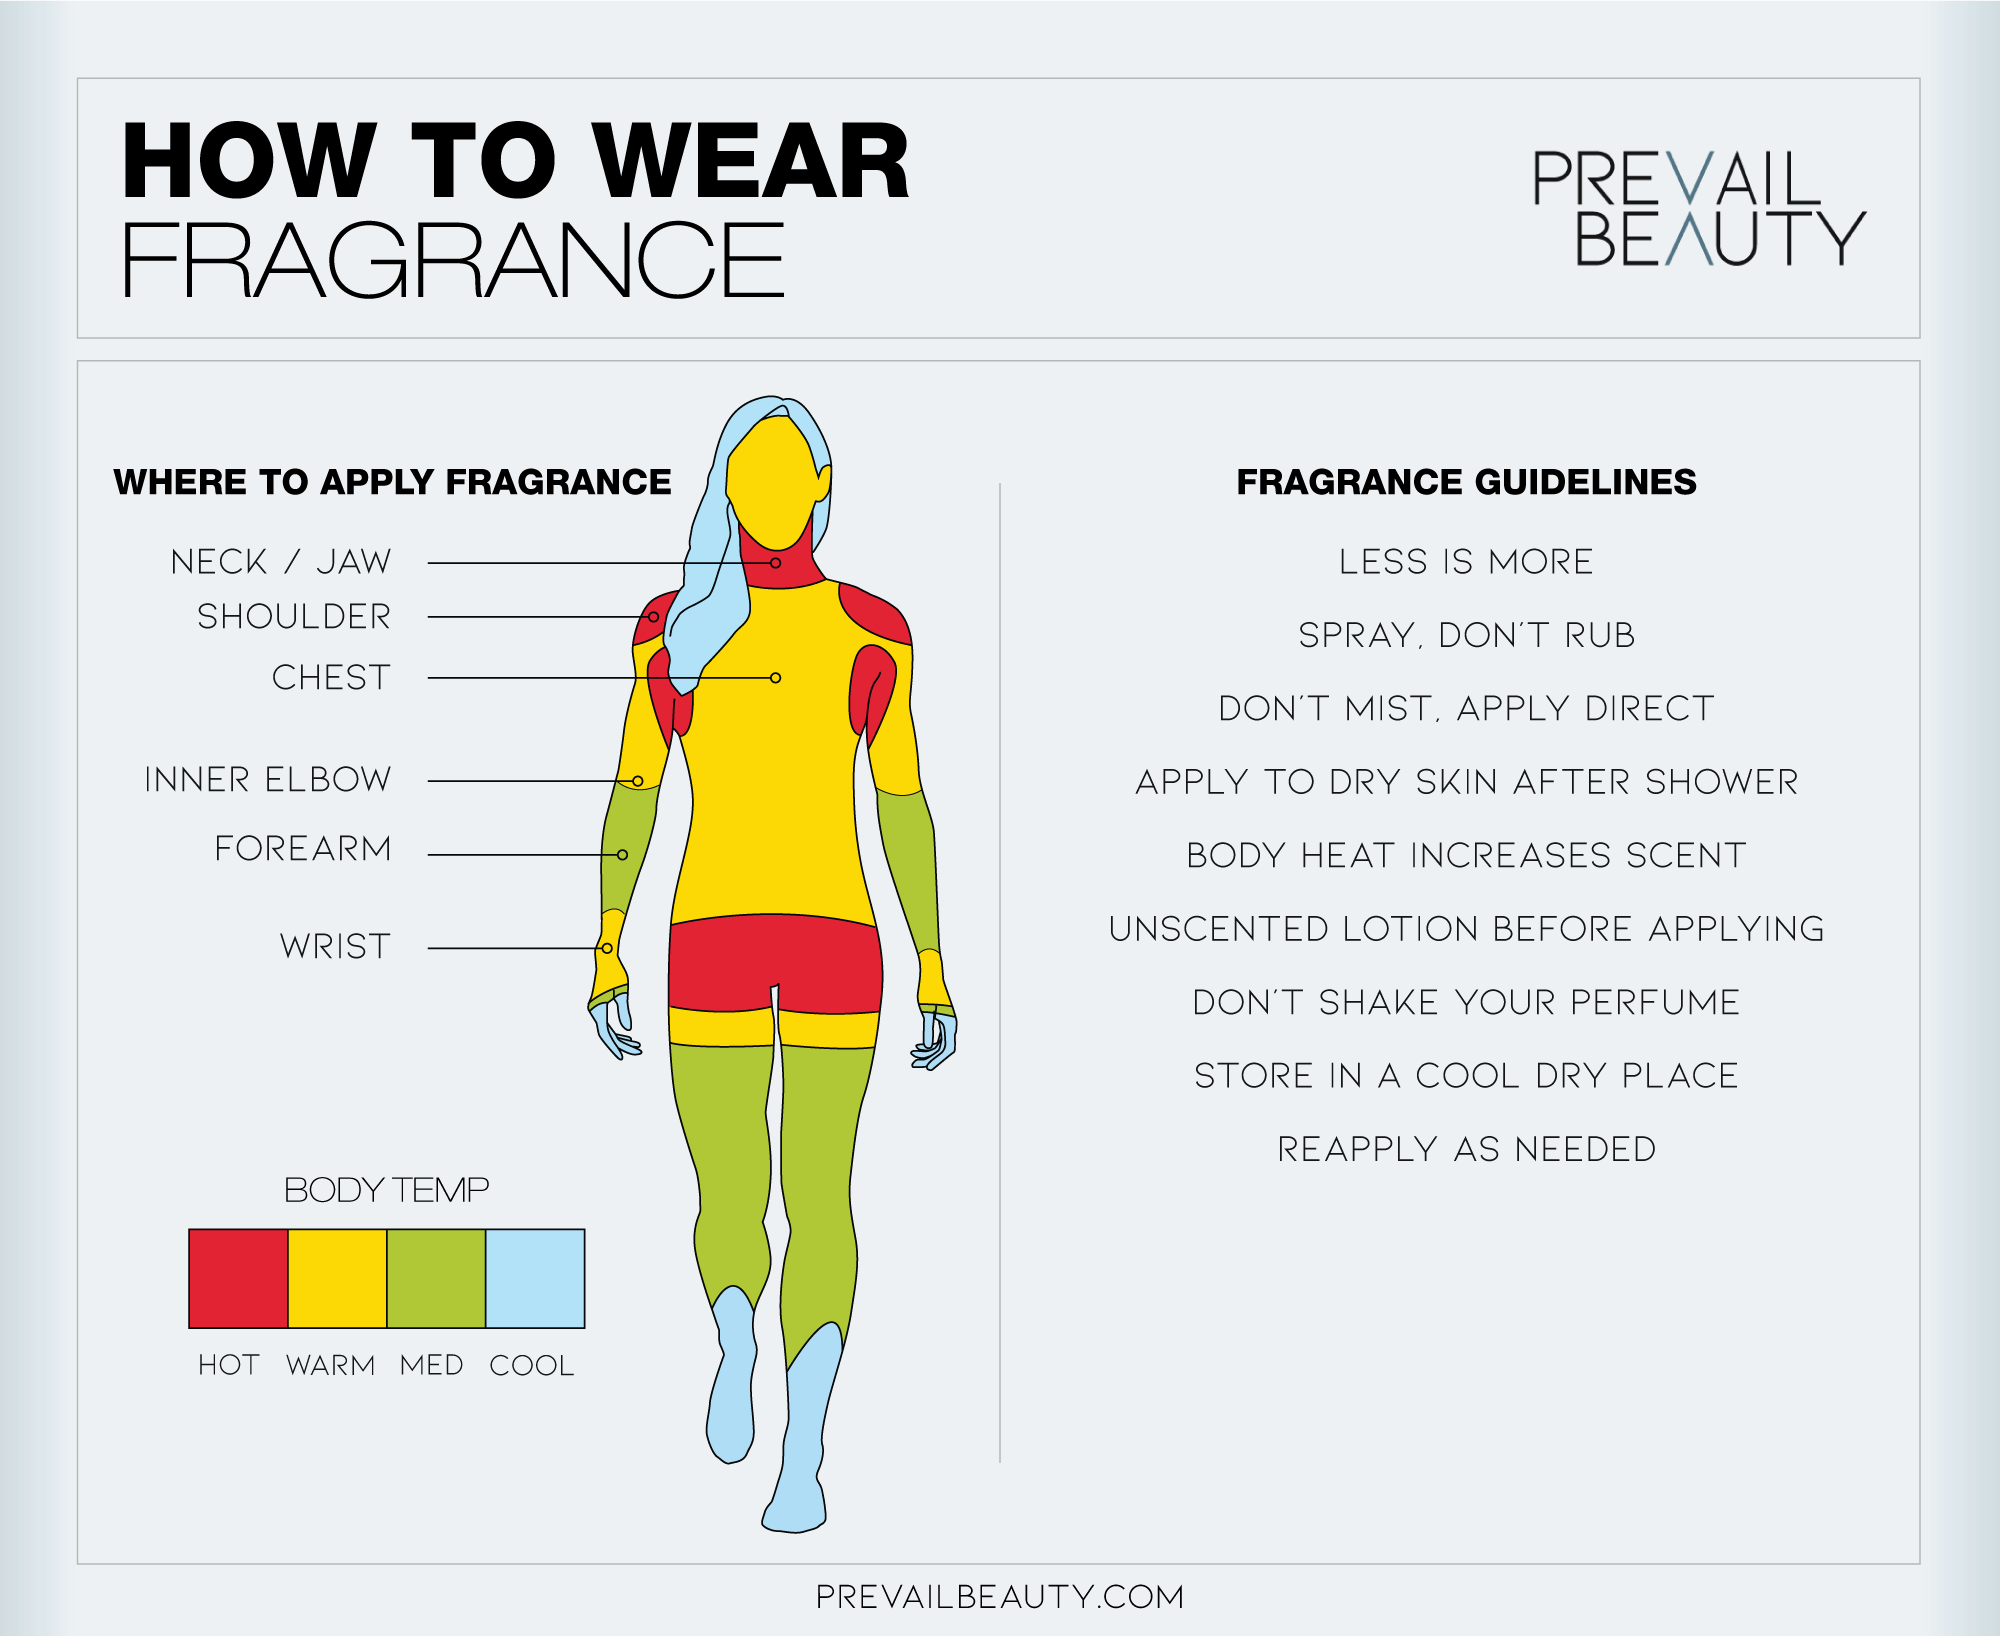 How to Wear Fragrance - 10 Tips